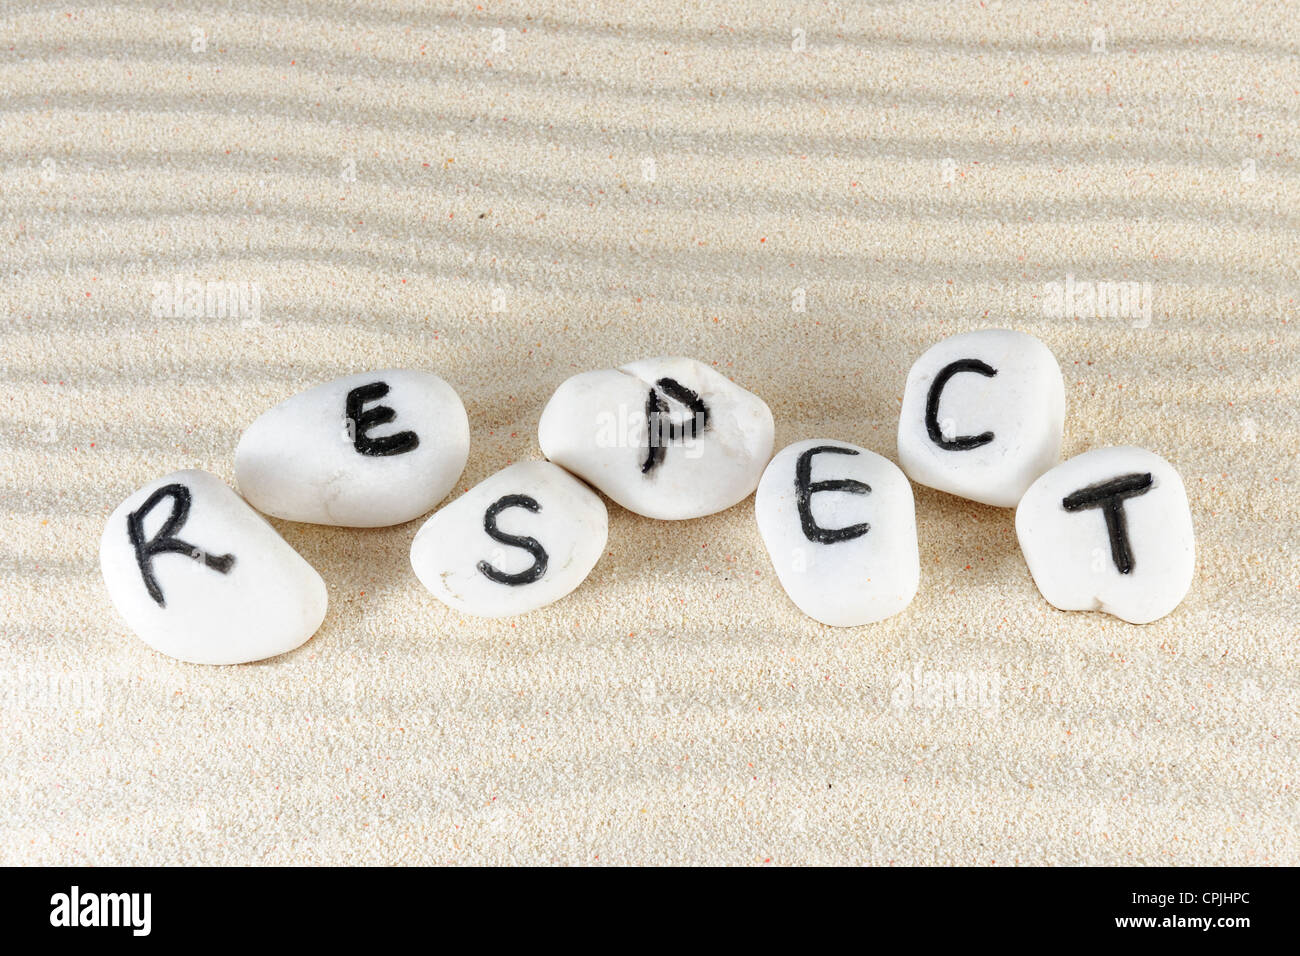 Respect word on group of stones with sand as background Stock Photo